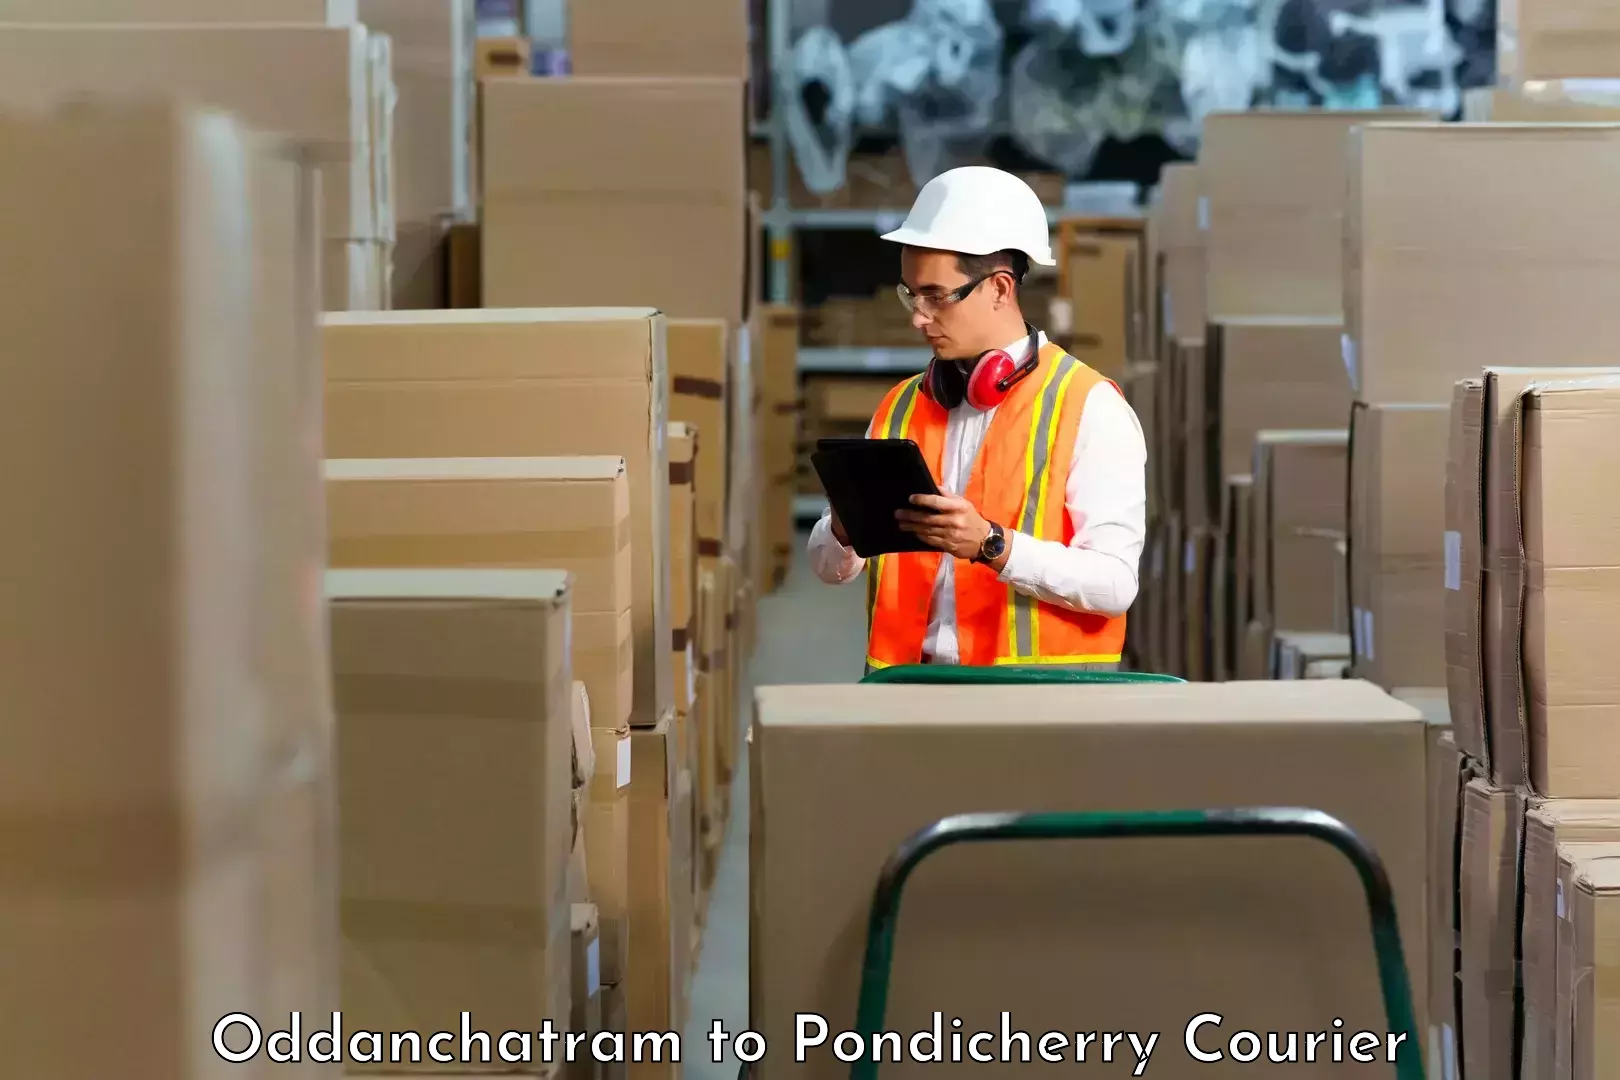 Seamless shipping experience Oddanchatram to Pondicherry